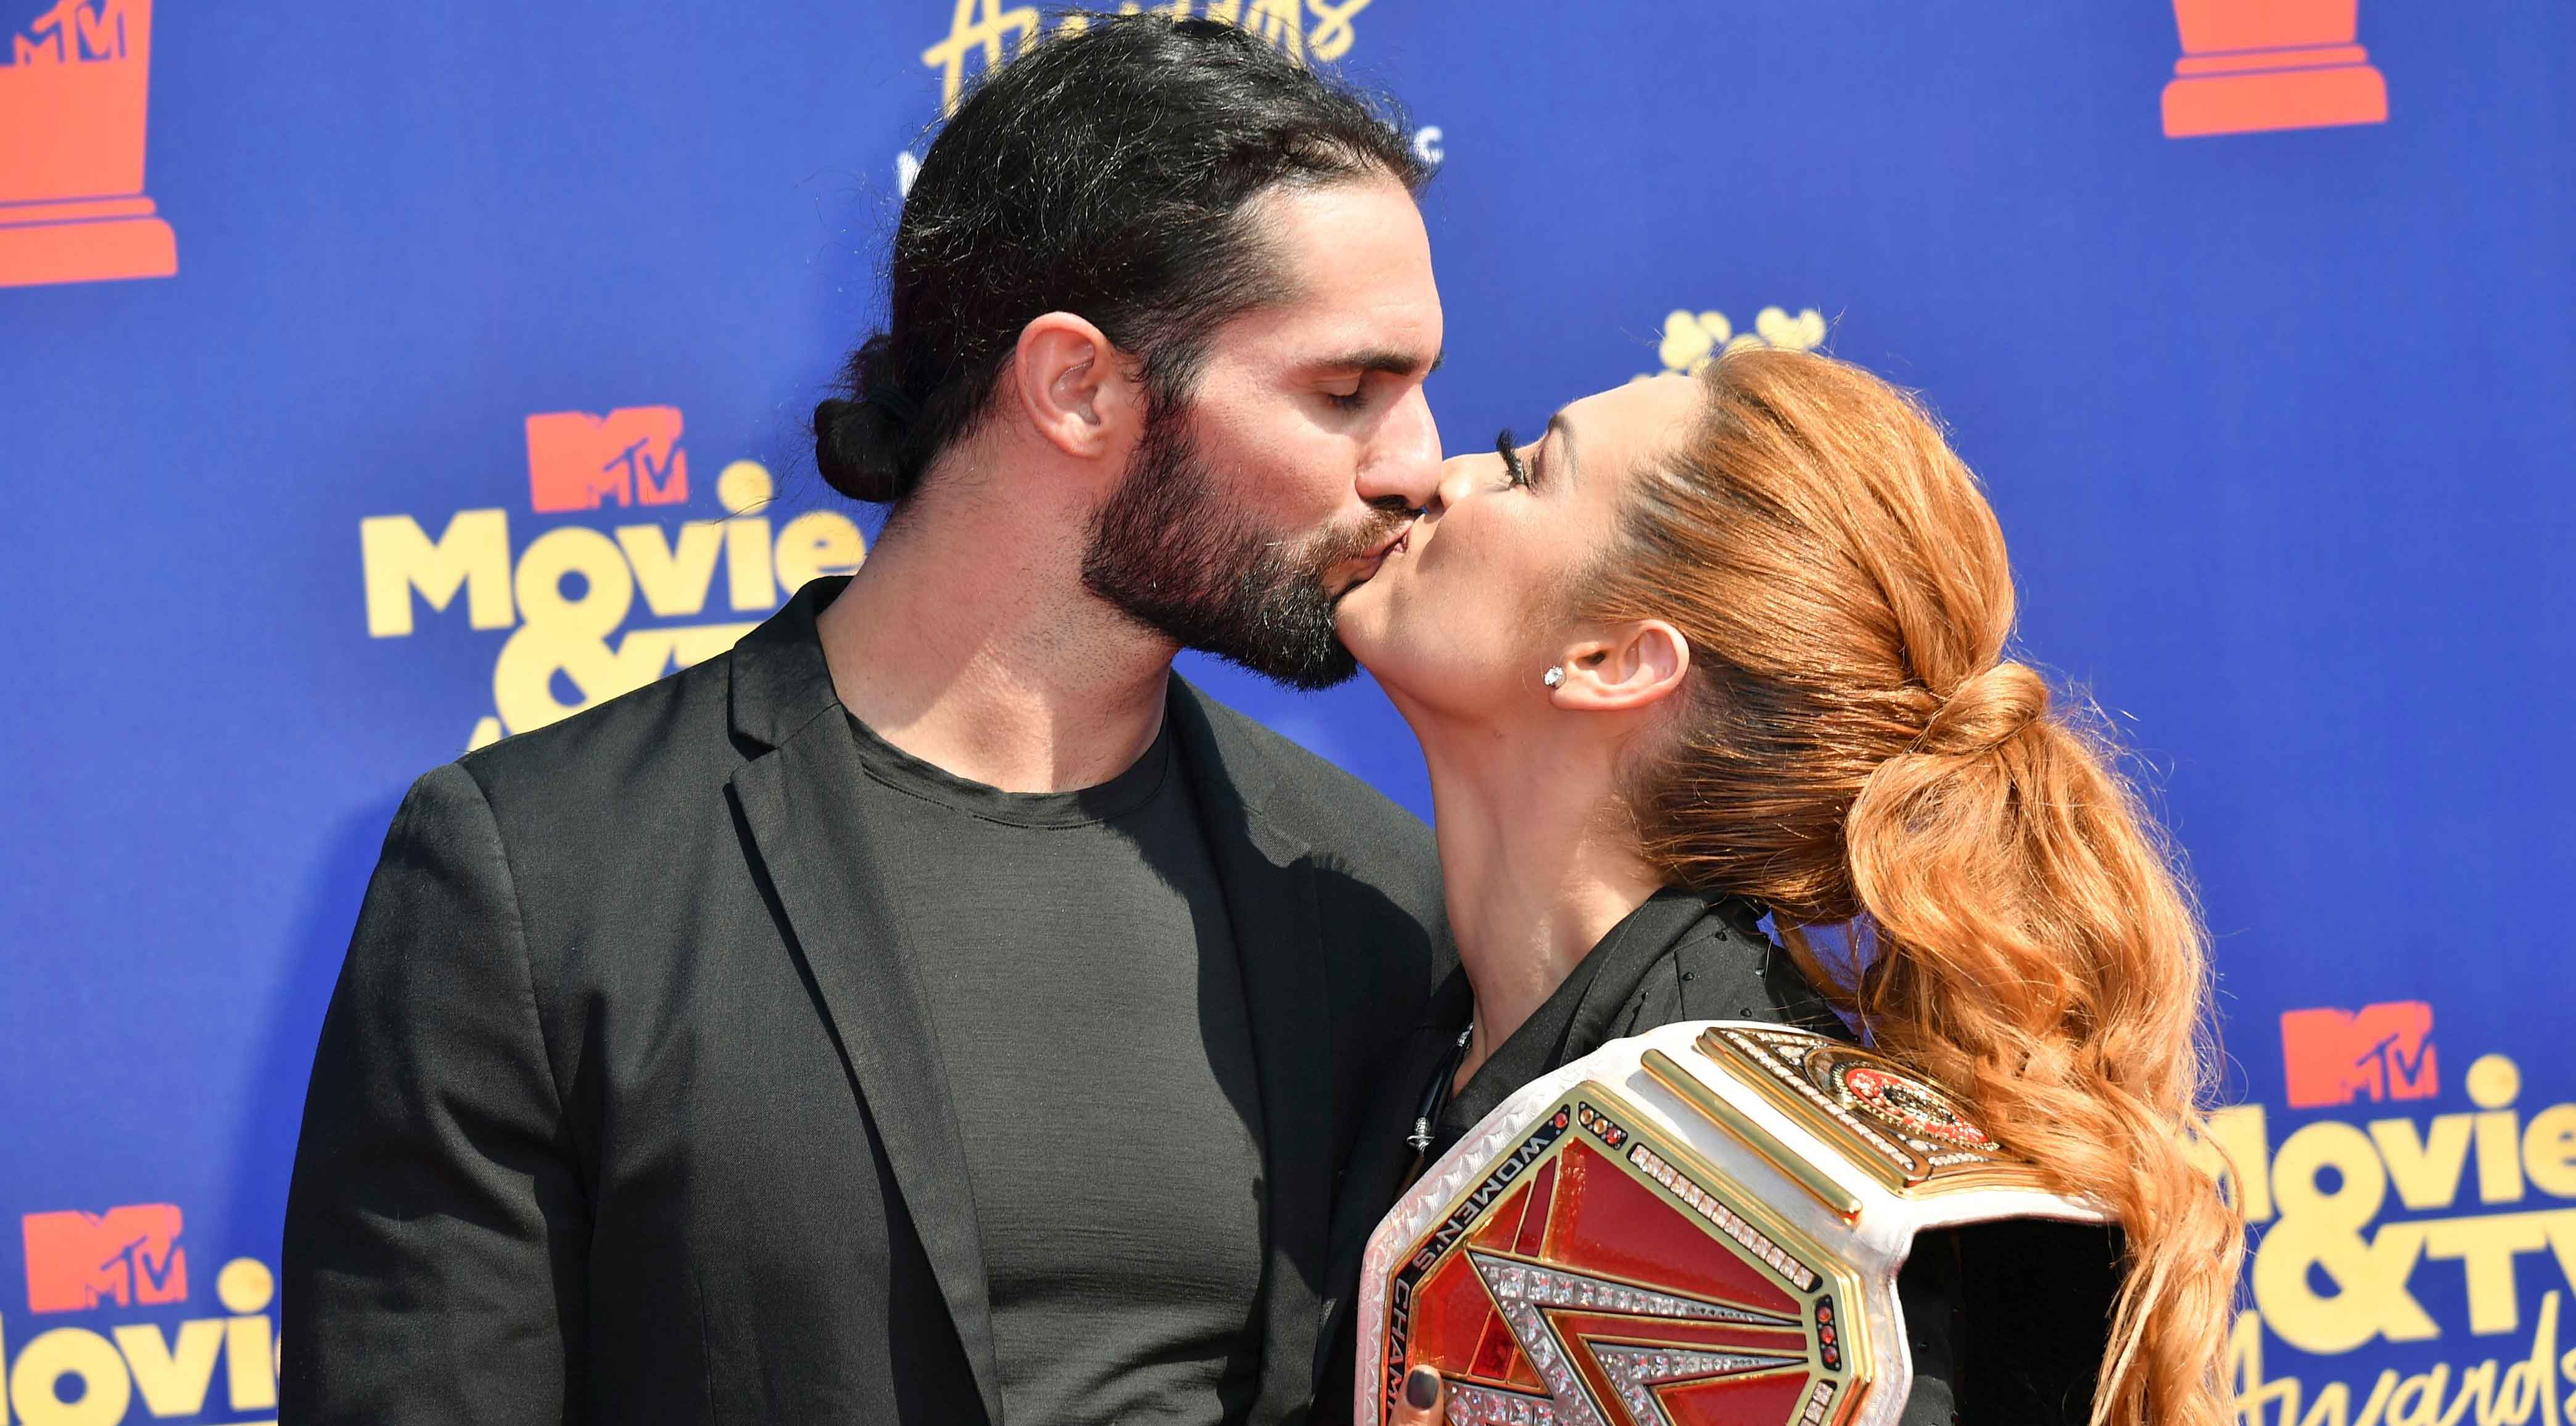 Wwe Stepene Xnxx - The Best Real-Life Wrestling Couples | Muscle & Fitness